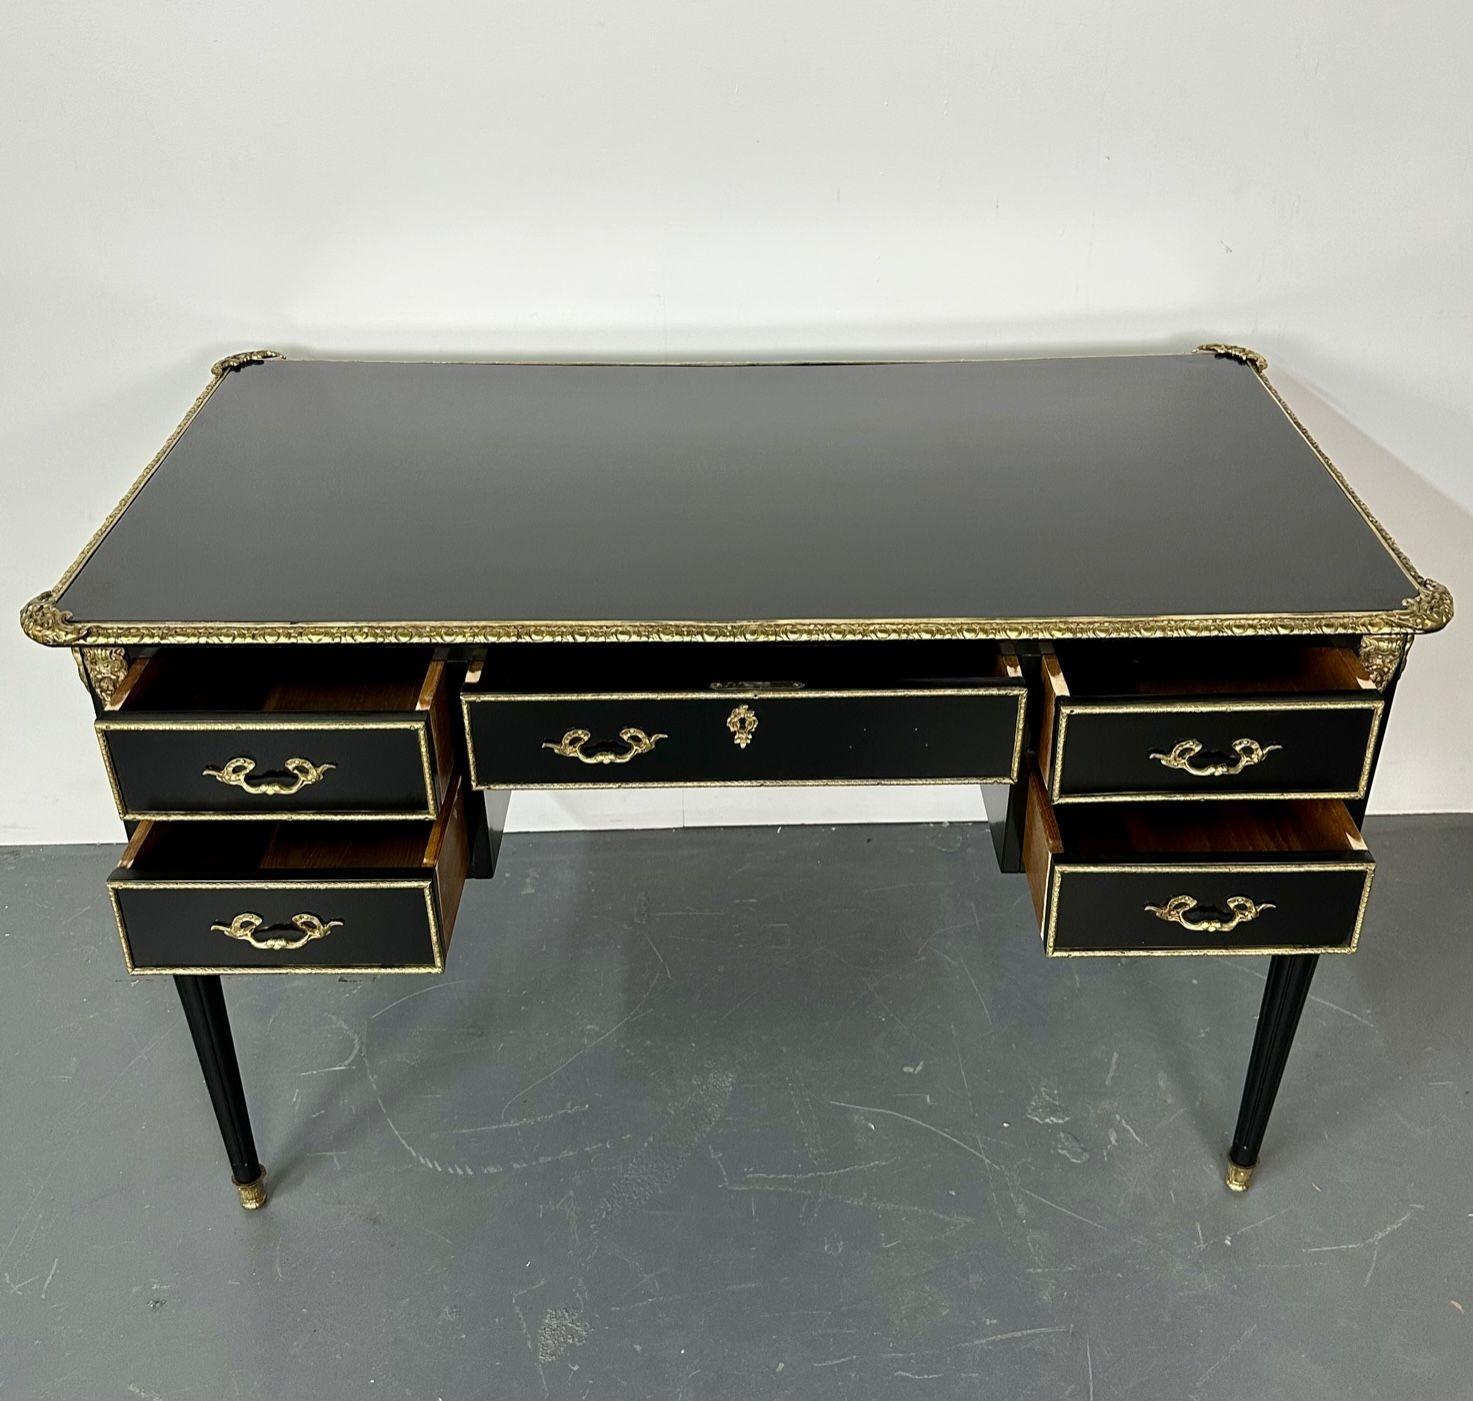 Hollywood Regency Ebony Desk, Writing Table or Vanity, Bronze Mounted, 1930s For Sale 1